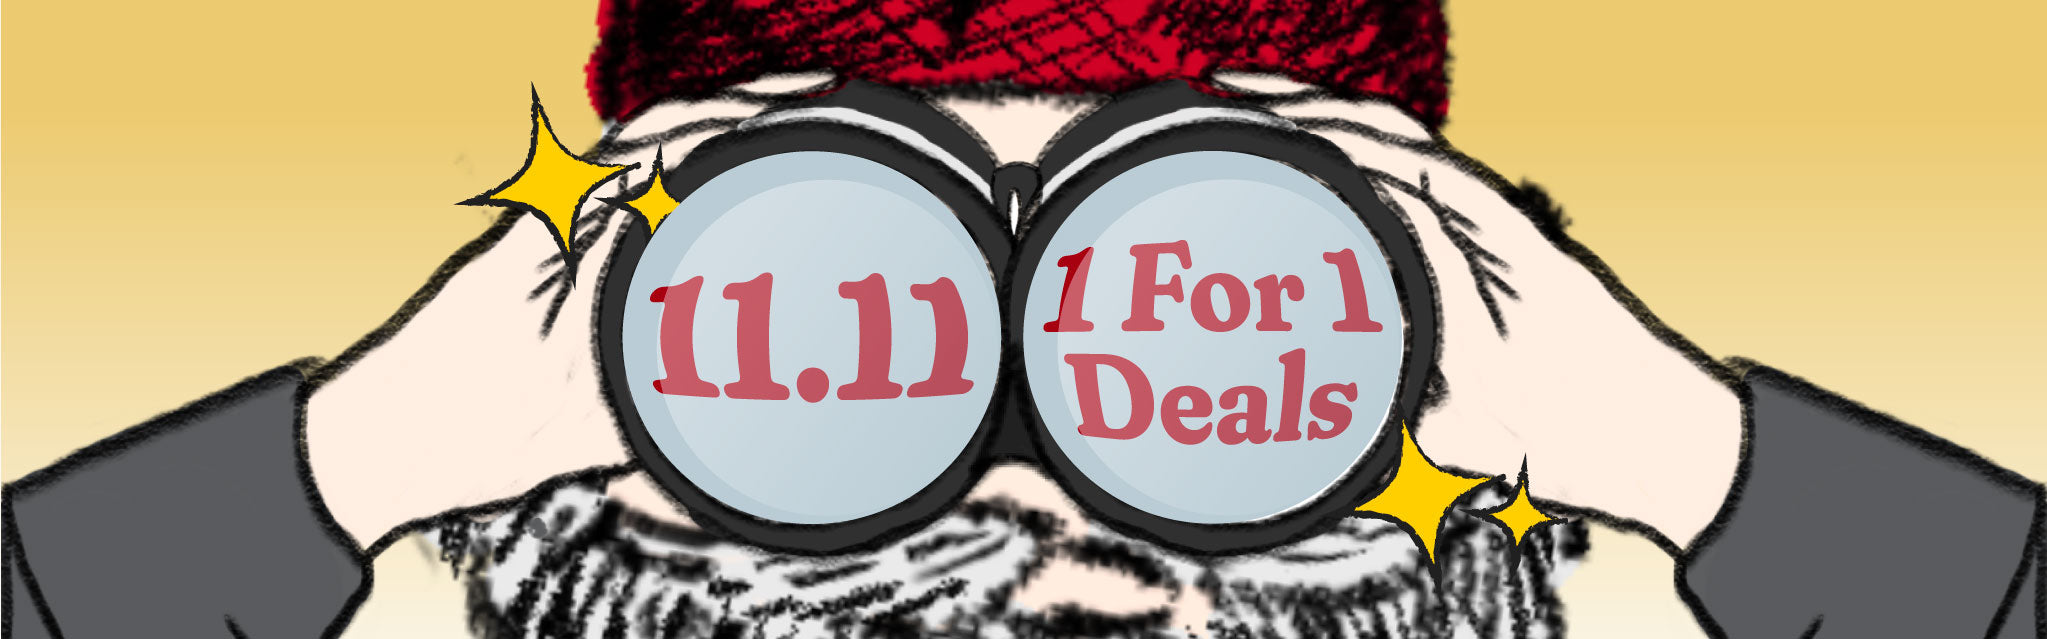 11.11 One-for-one Deals